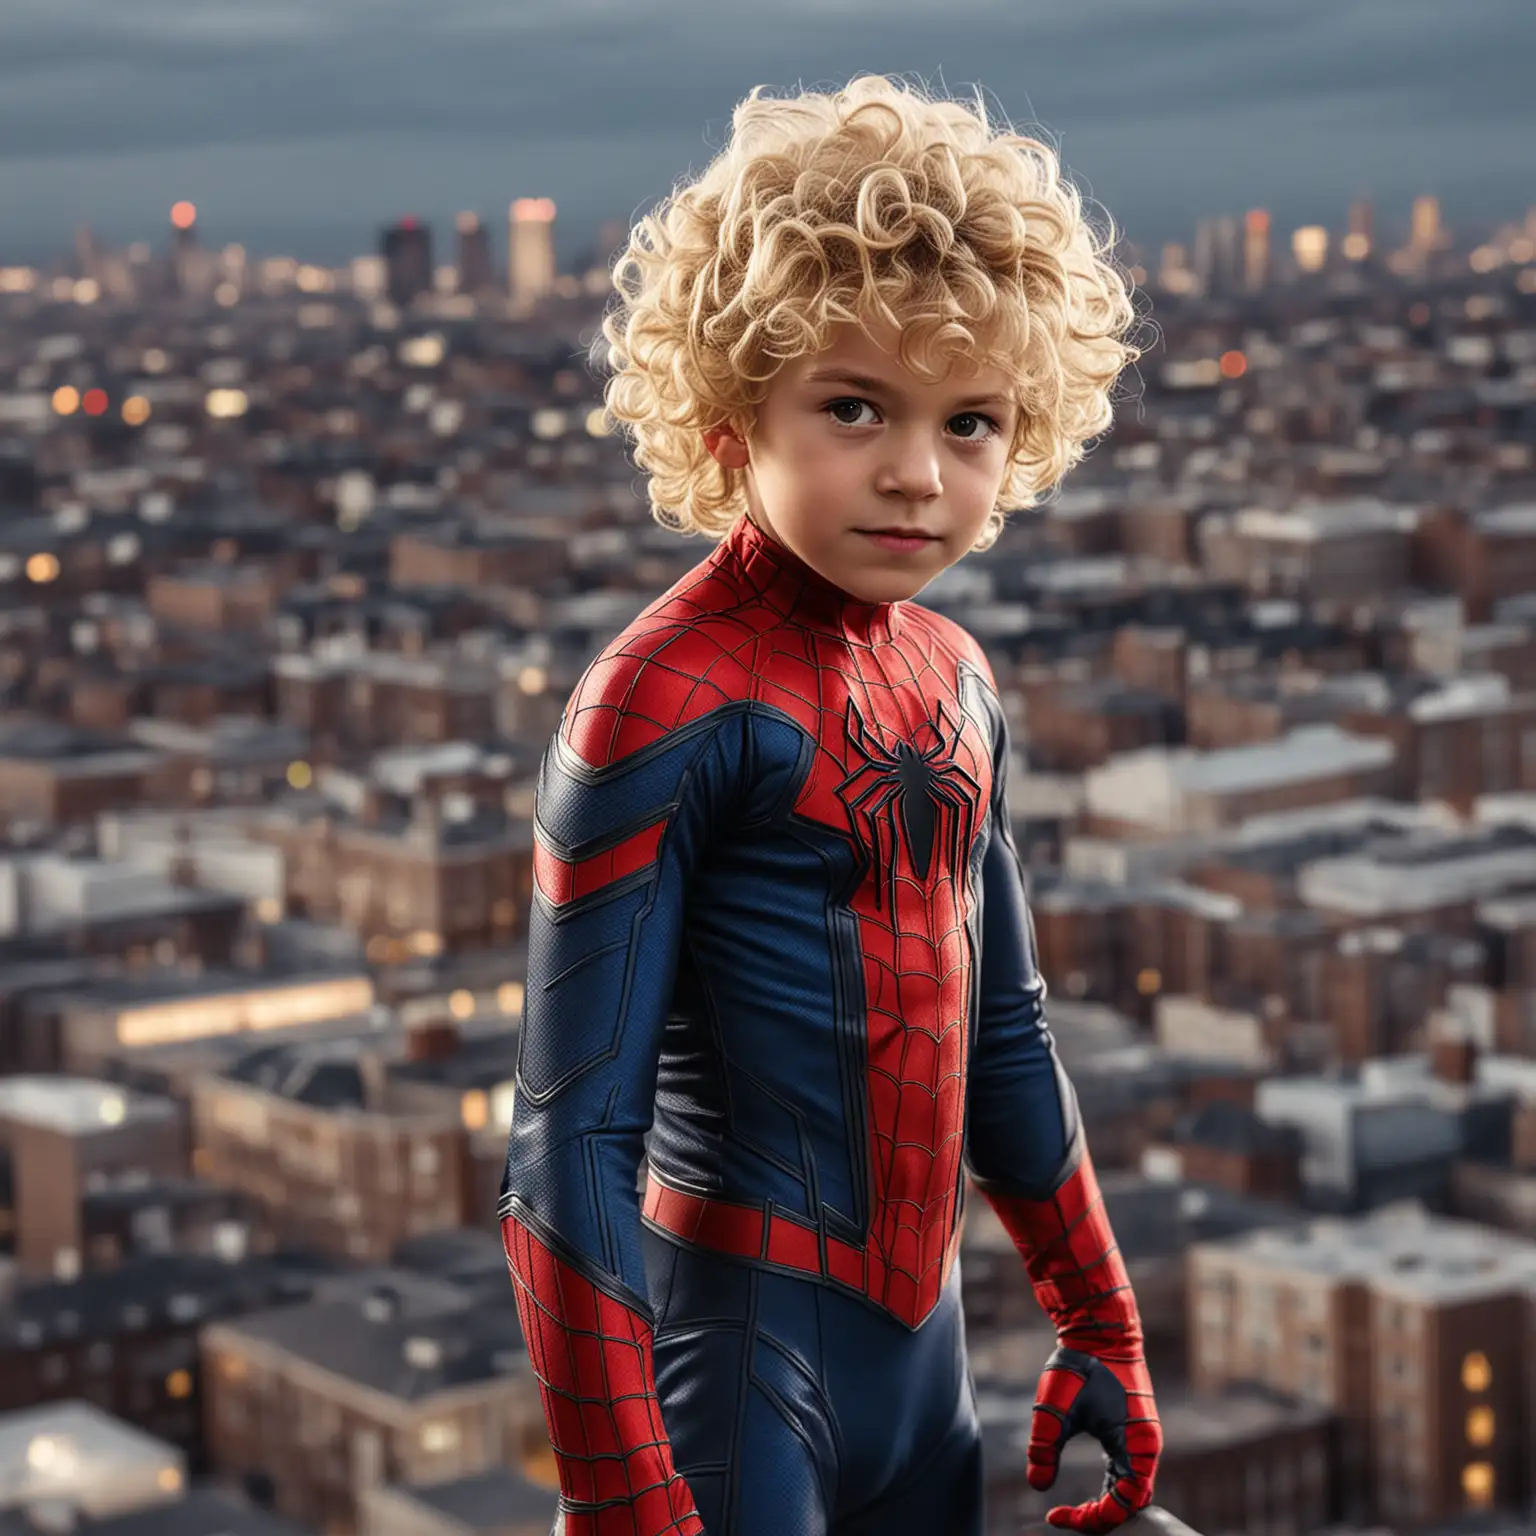 Blonde Curly Haired Boy in Spiderman Costume Against Dark Cityscape